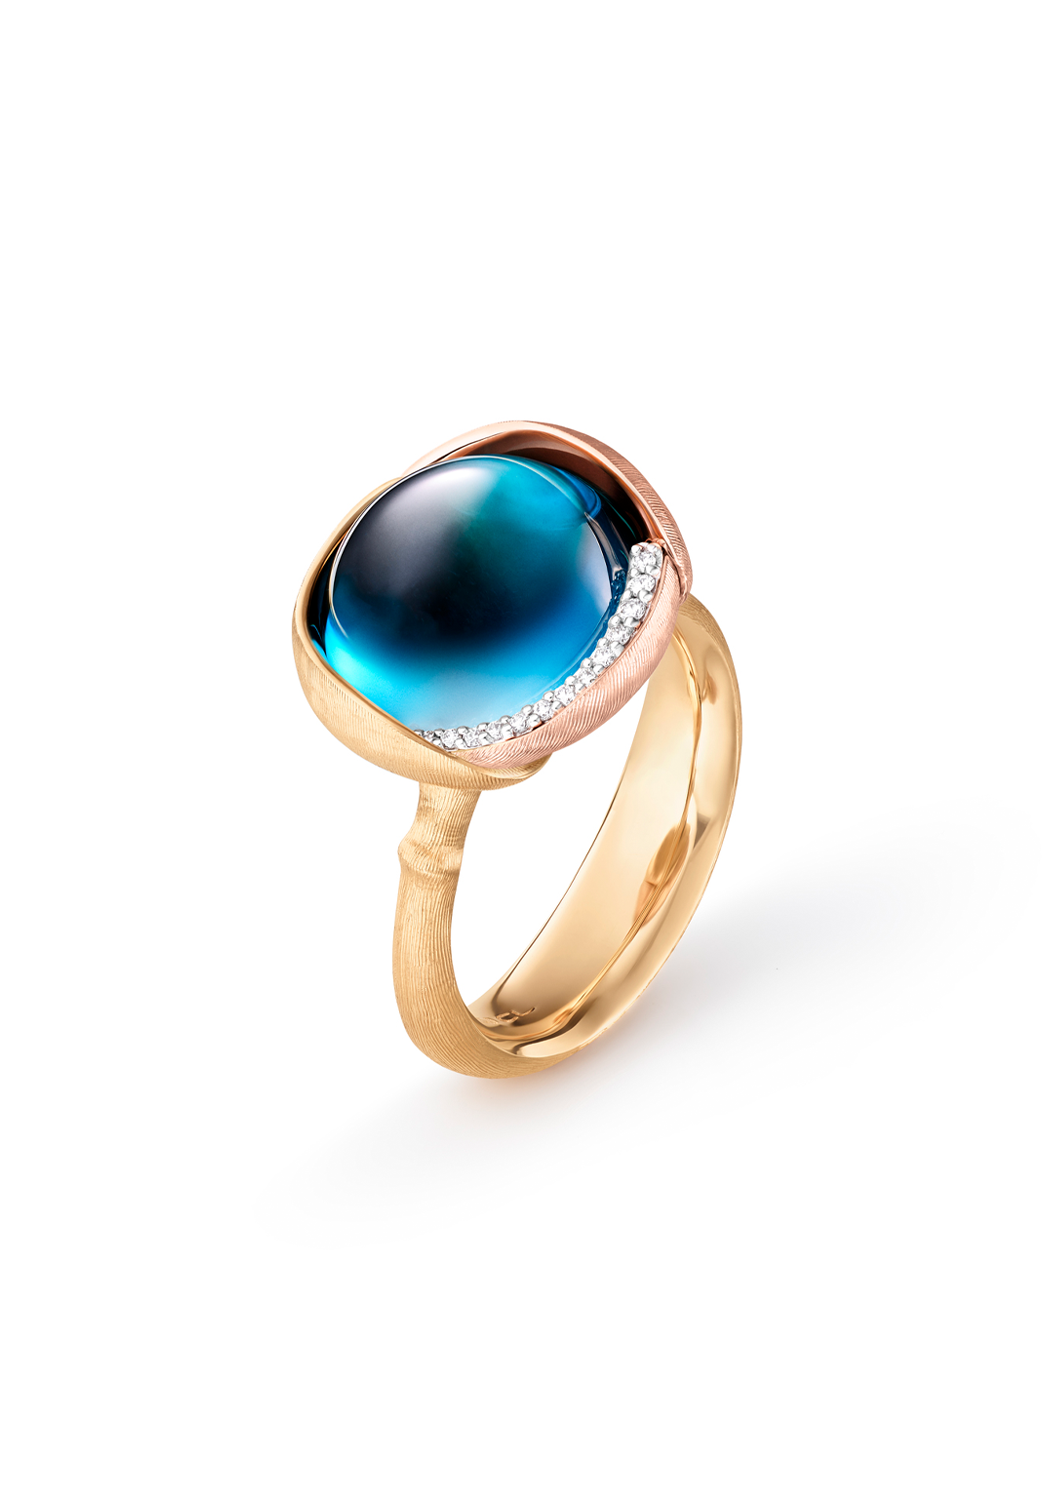 Buy 4mm London Blue Topaz Ring in 14k Real Gold | Chordia Jewels